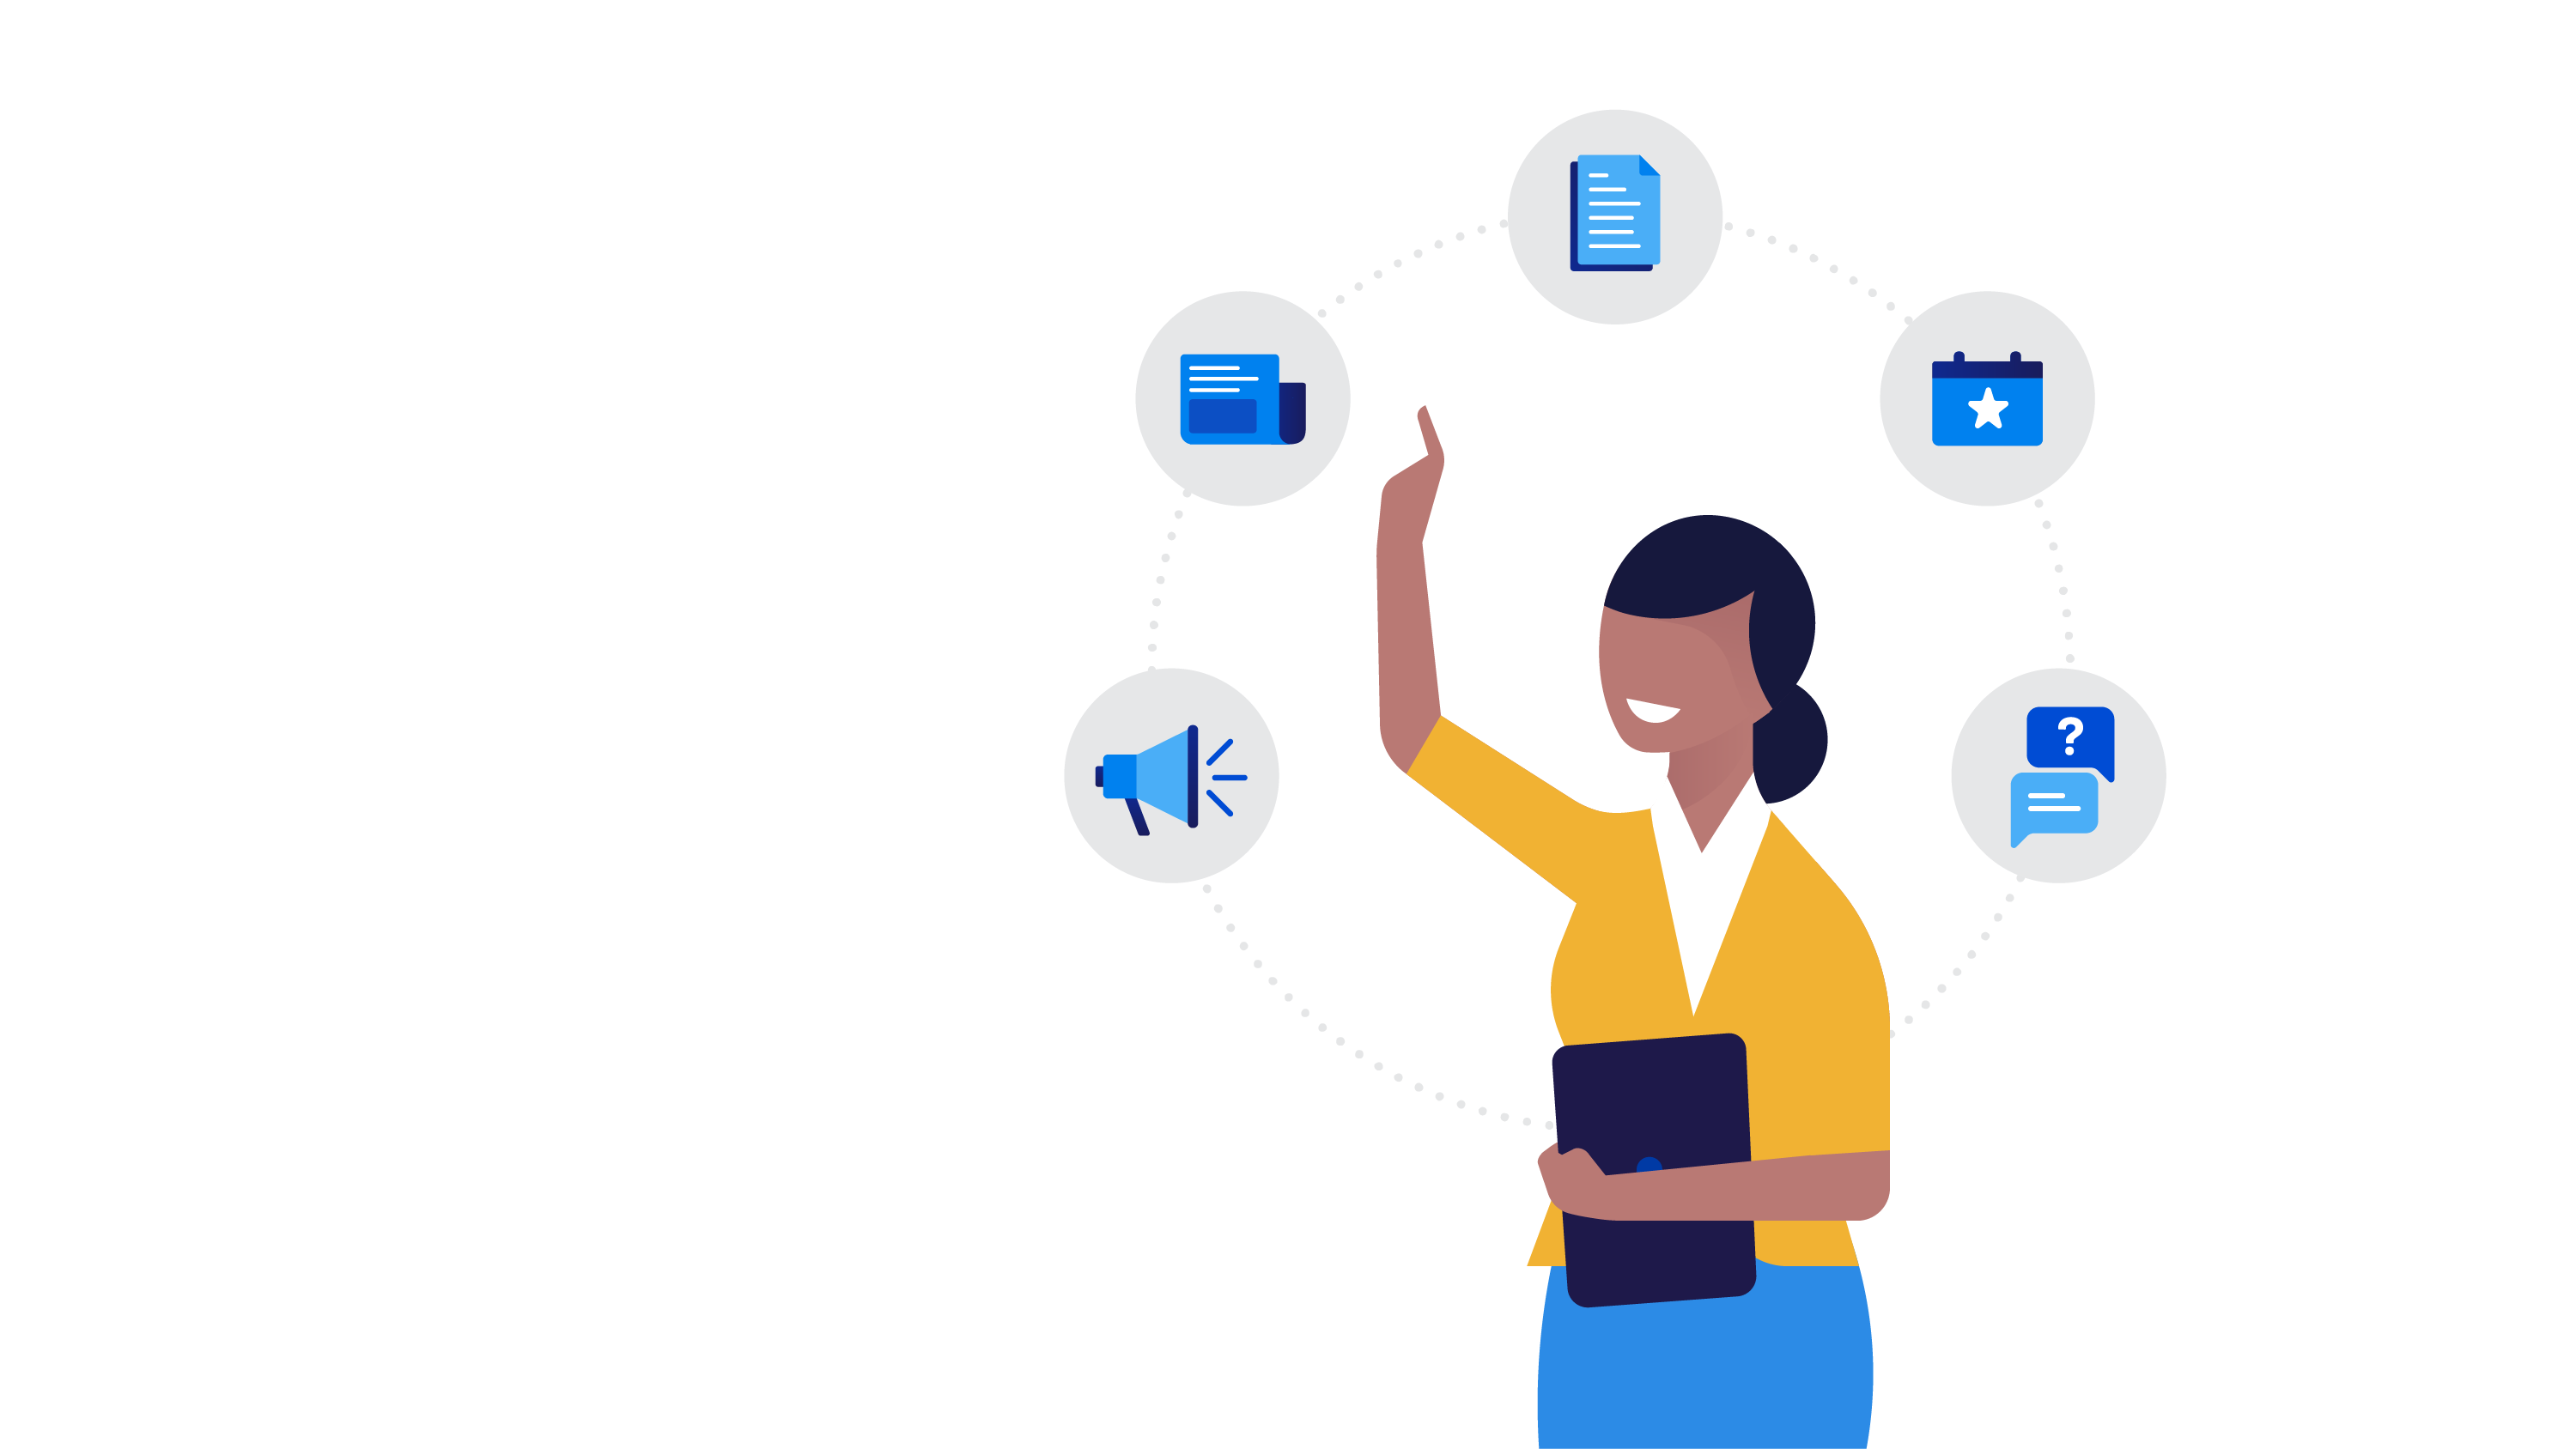 Illustration of a woman choosing from icons that represent latest product updates, blog posts, resources, upcoming events and contact information